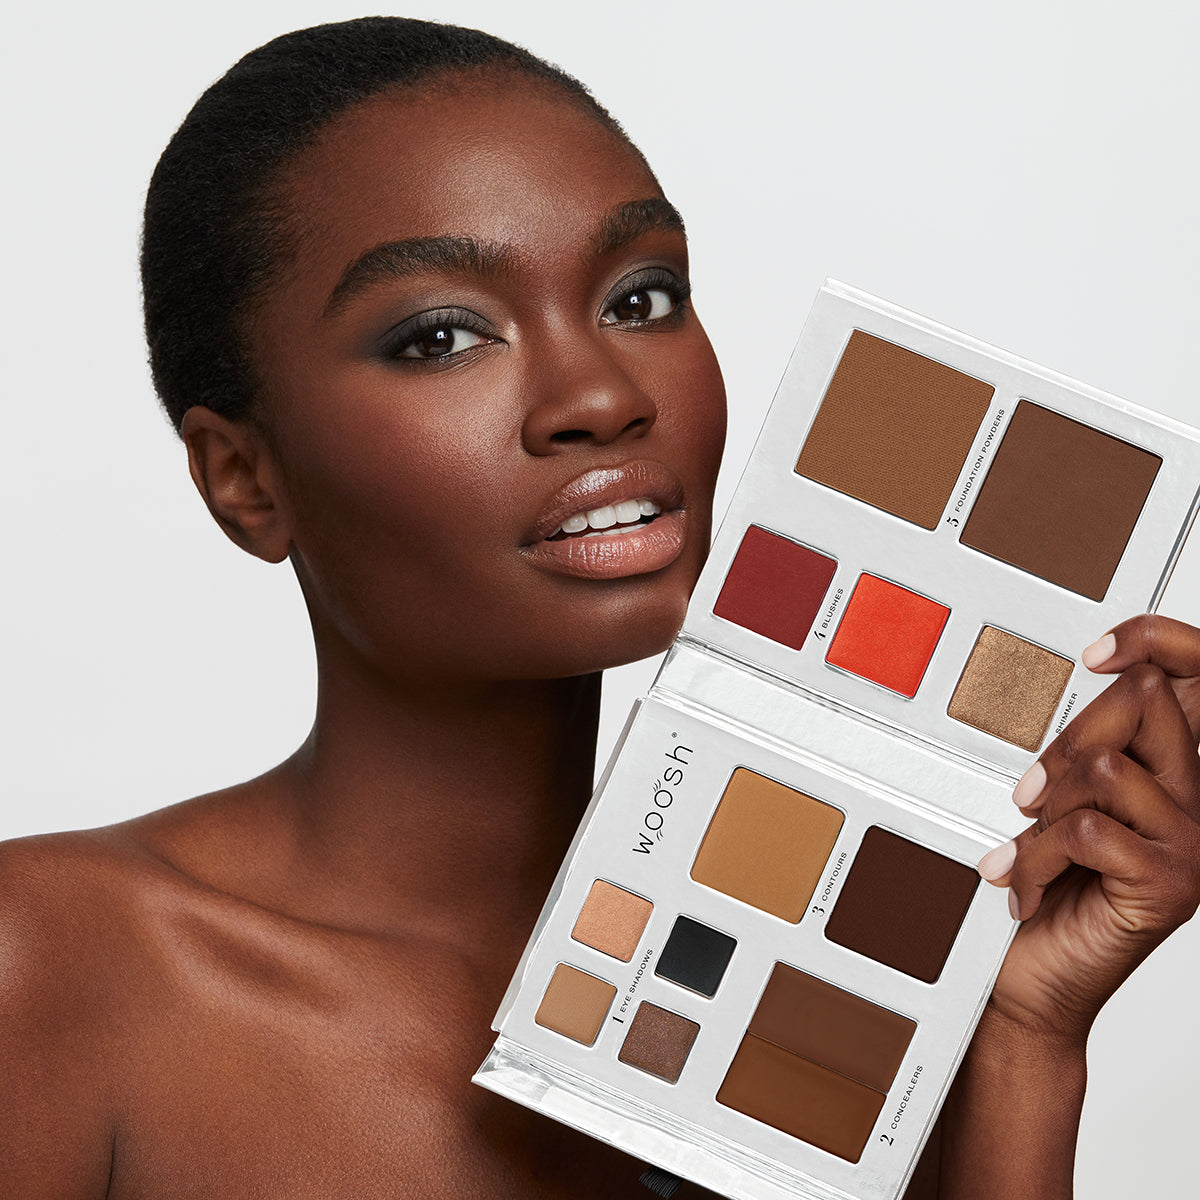 Brunette Model holding the 13 pan Fold out Face palette that includes Eyeshadow, cream concealer, contour, blush, highlight, and foundation powders.